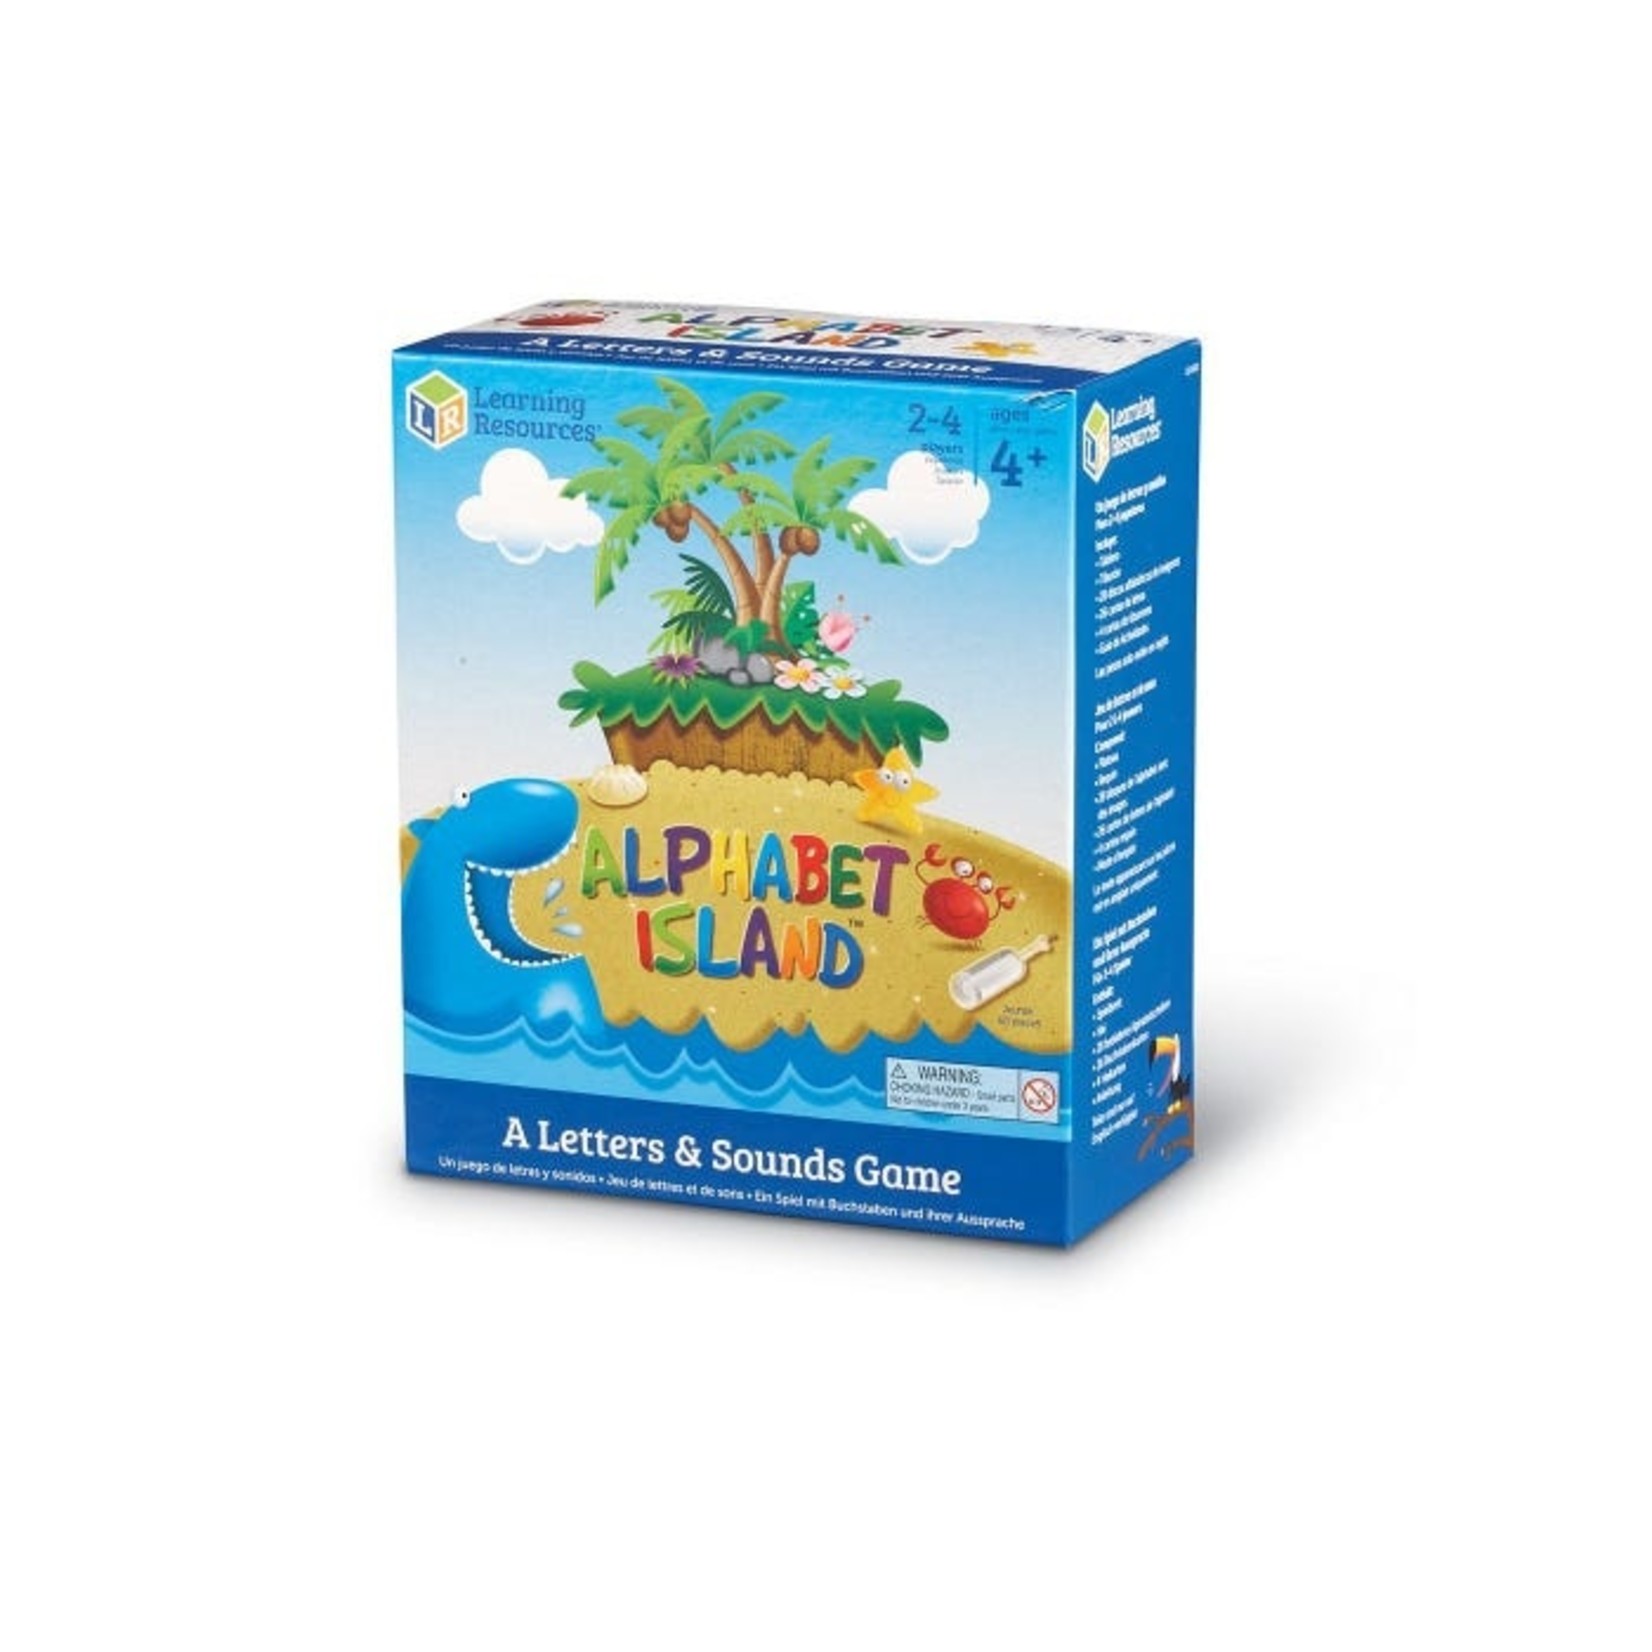 LEARNING RESOURCES INC Alphabet Island™ A Letters & Sounds Game